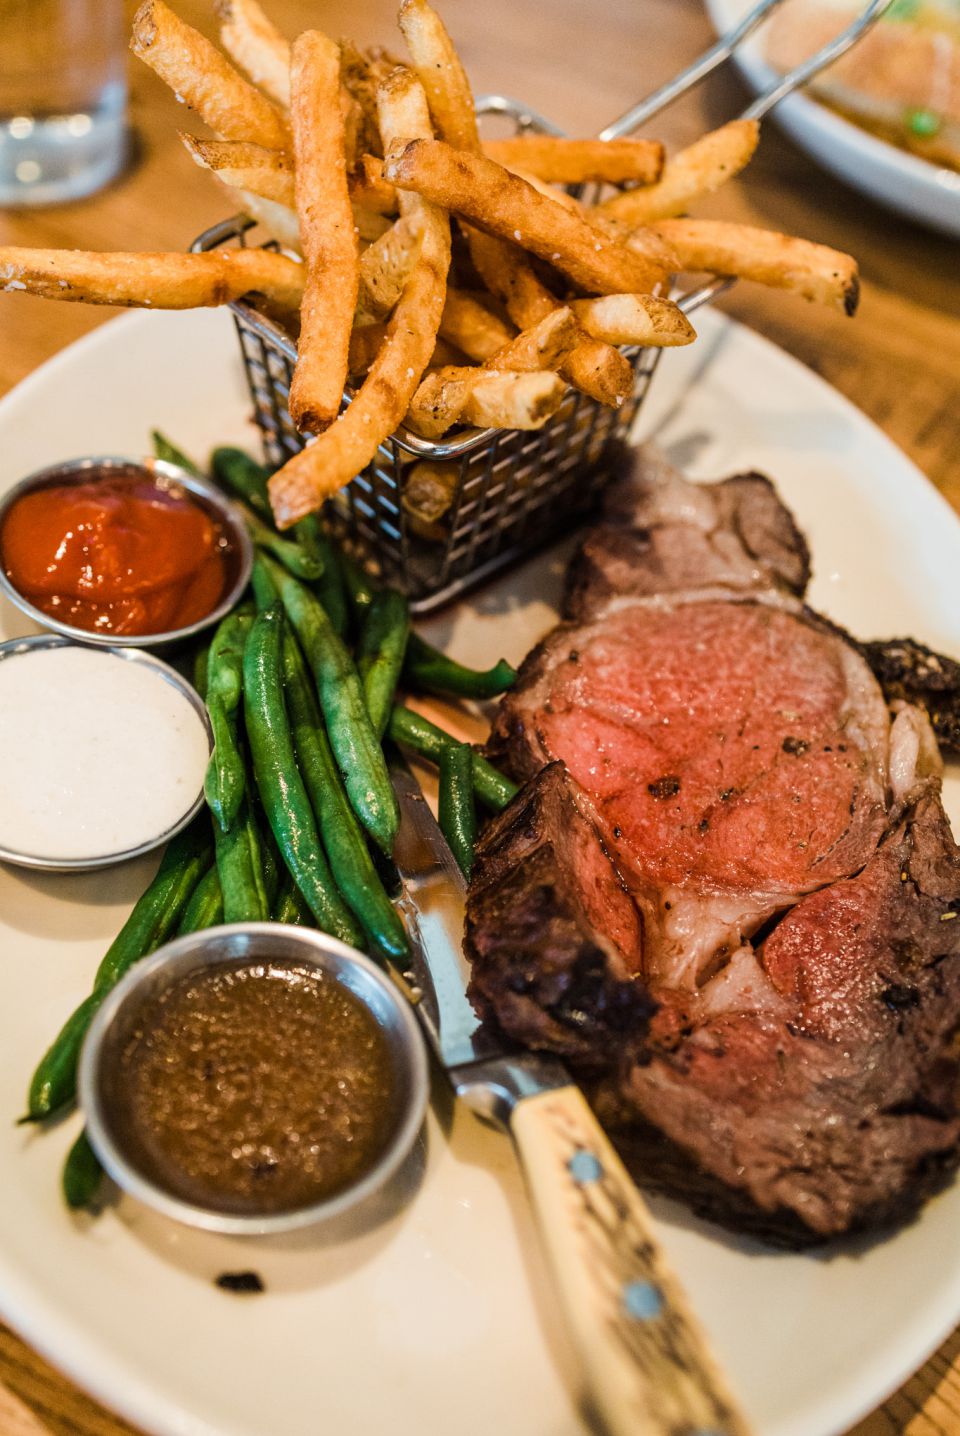 Herb-crusted Prime Rib at Founding Farmers Tysons